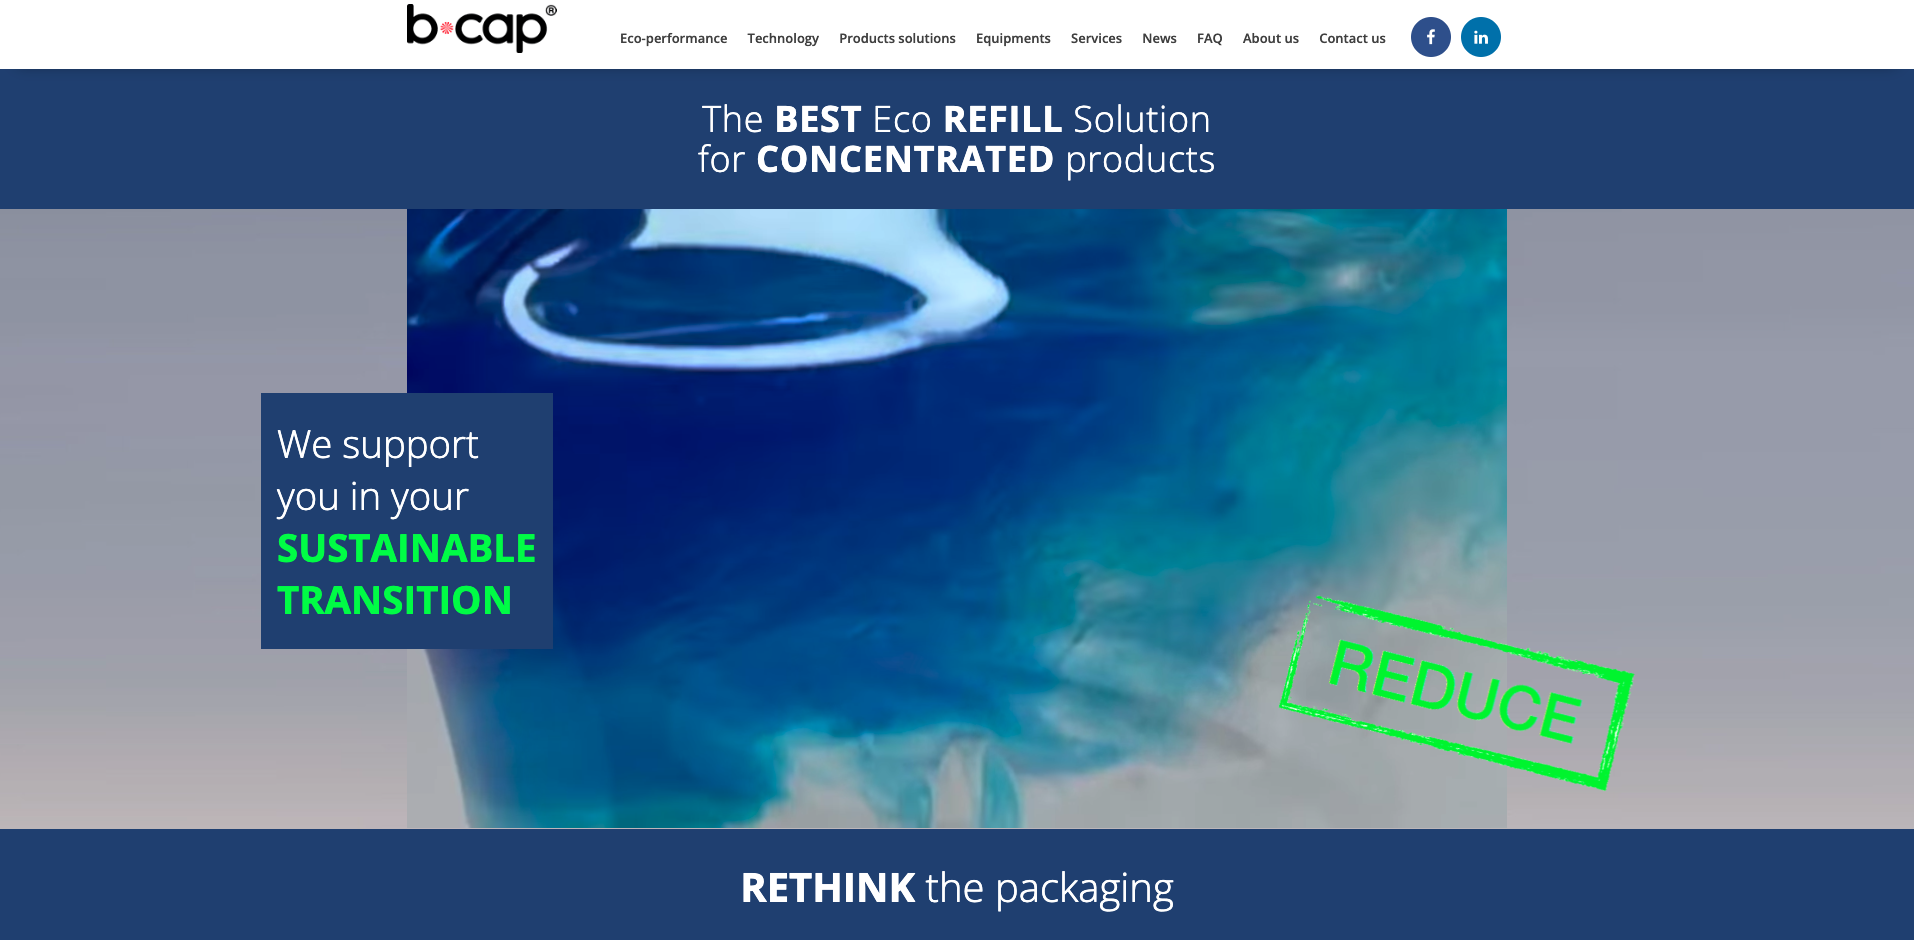 b-cap A reusable, refillable solution for plastic bottles and vessels